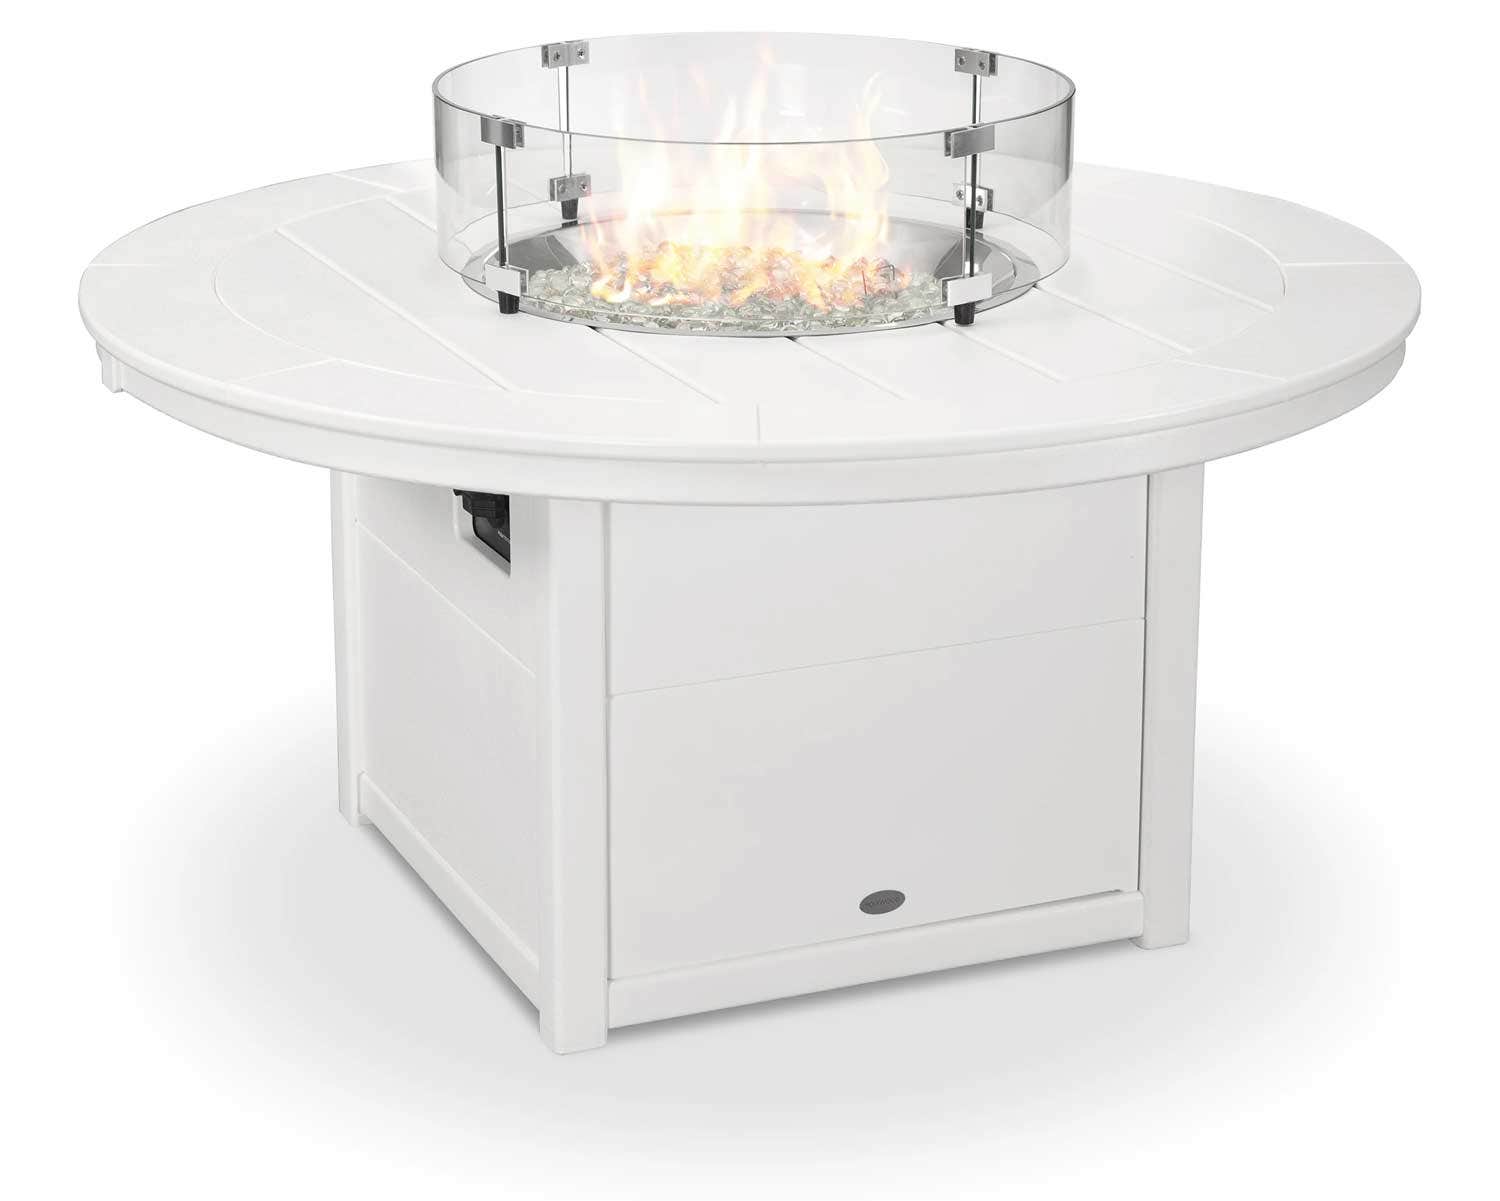 POLYWOOD Fire Table with Round 48 inch Top Fireplaces White 12033412